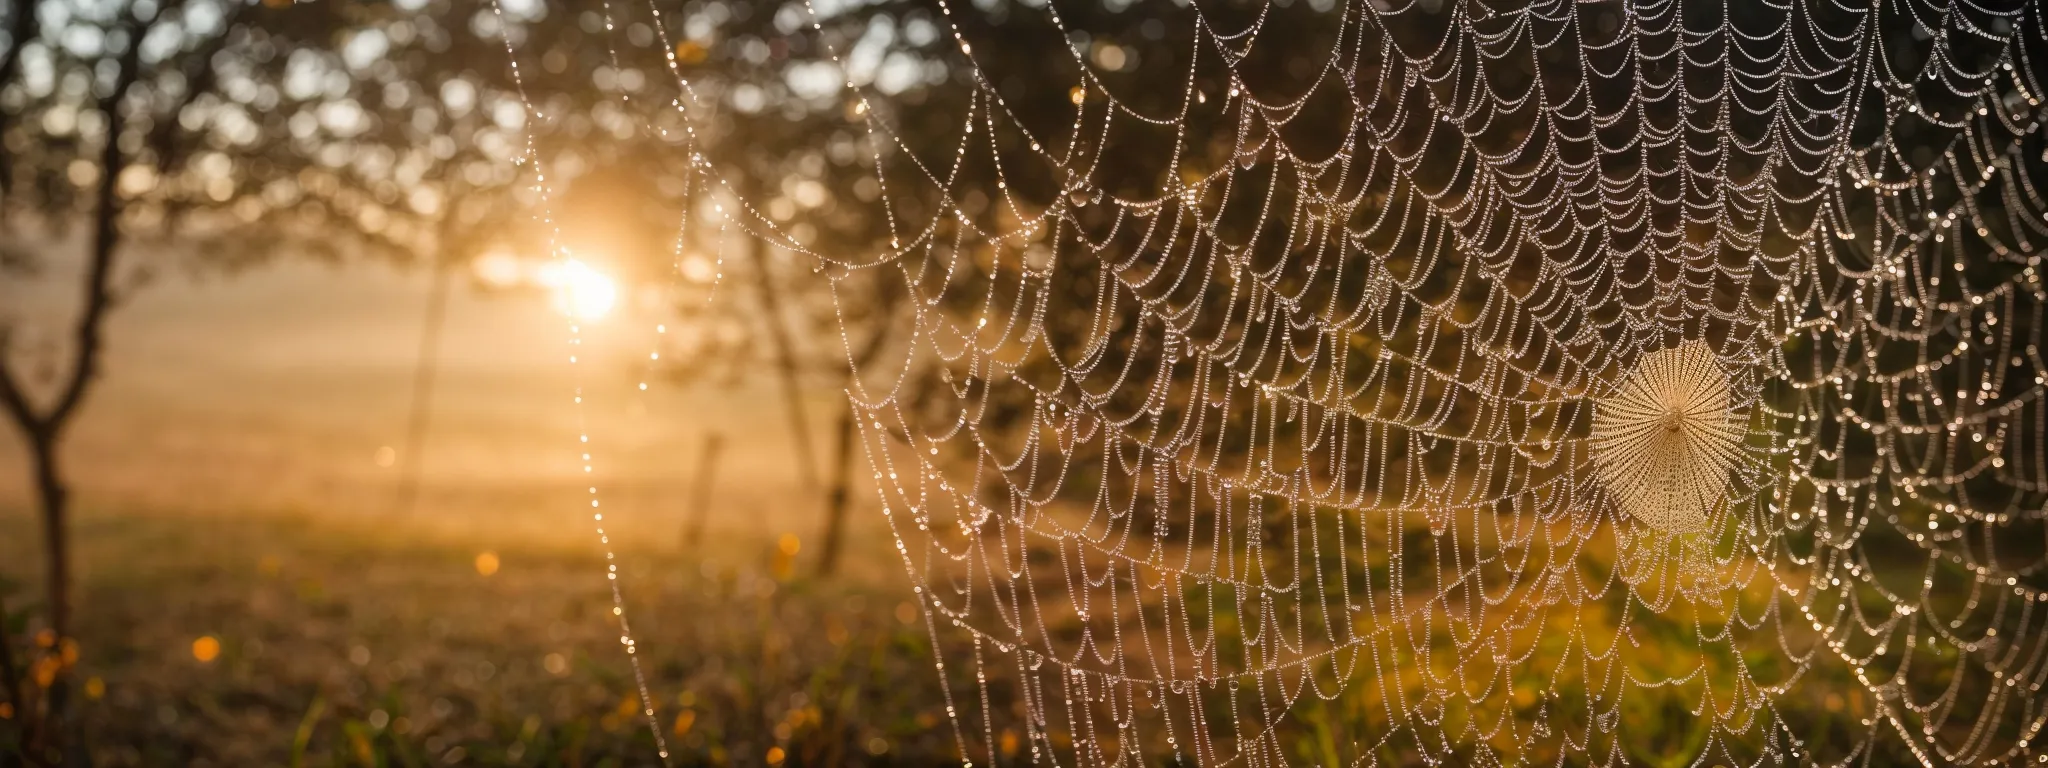 a spider web glistening with morning dew as the sun rises, symbolizing the intricate, interconnected structure of an optimized ecommerce platform.